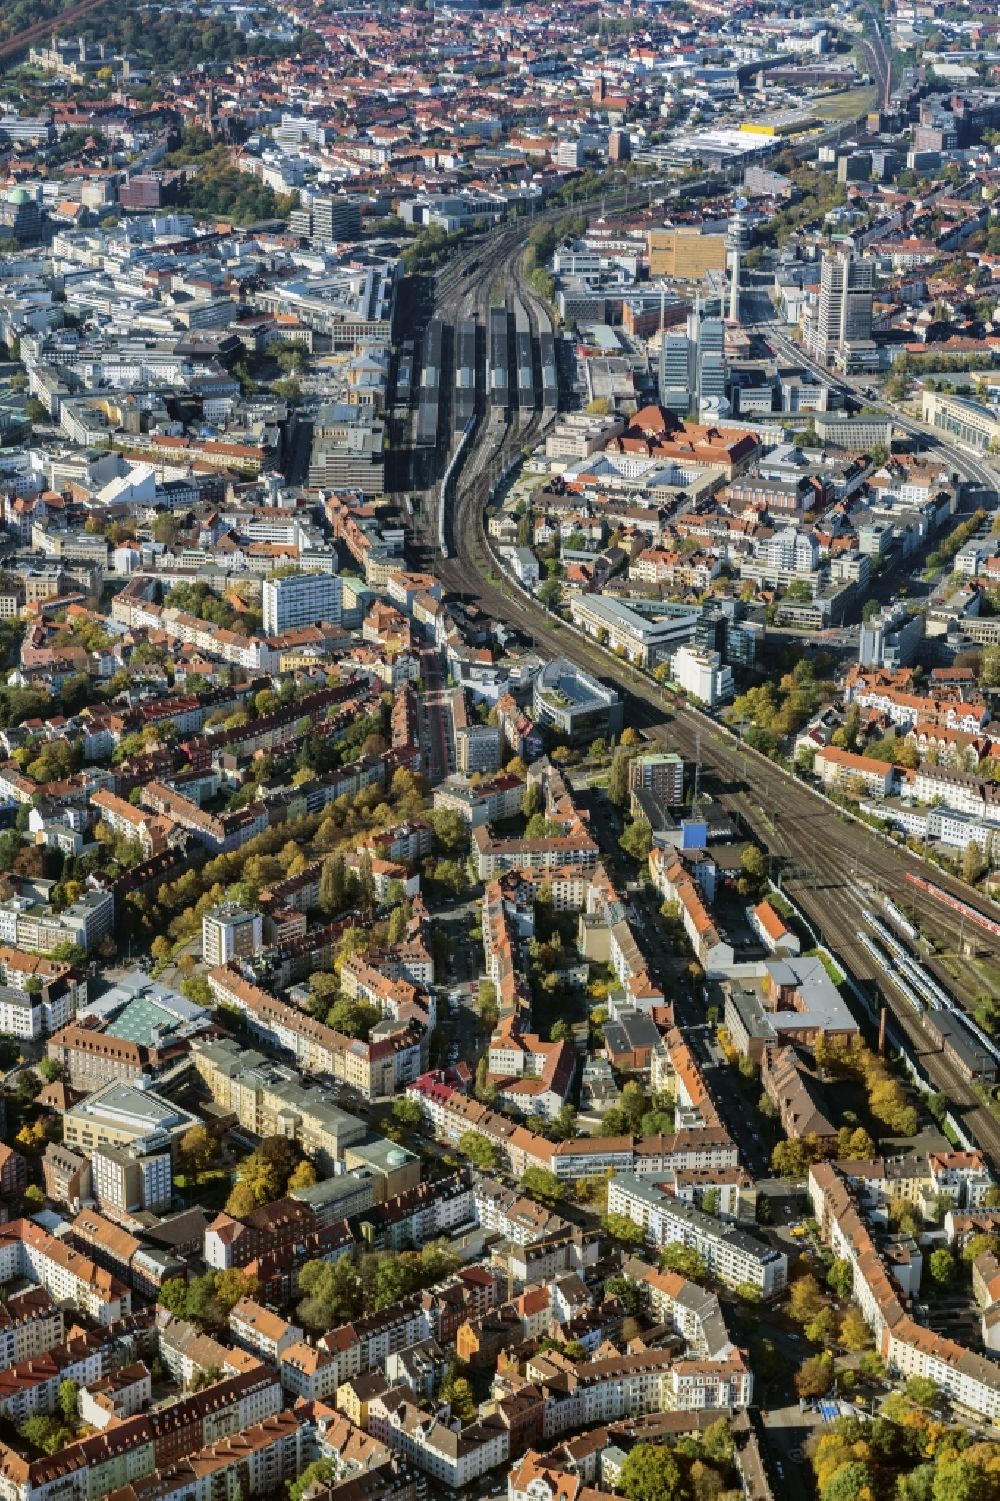 Hannover from above - Overview of downtown Mitte with main train station in Hanover in the state of Lower Saxony, Germany Track layout and buildings of the main train station of the Deutsche Bahn in Hanover in the federal state of Lower Saxony, Germany